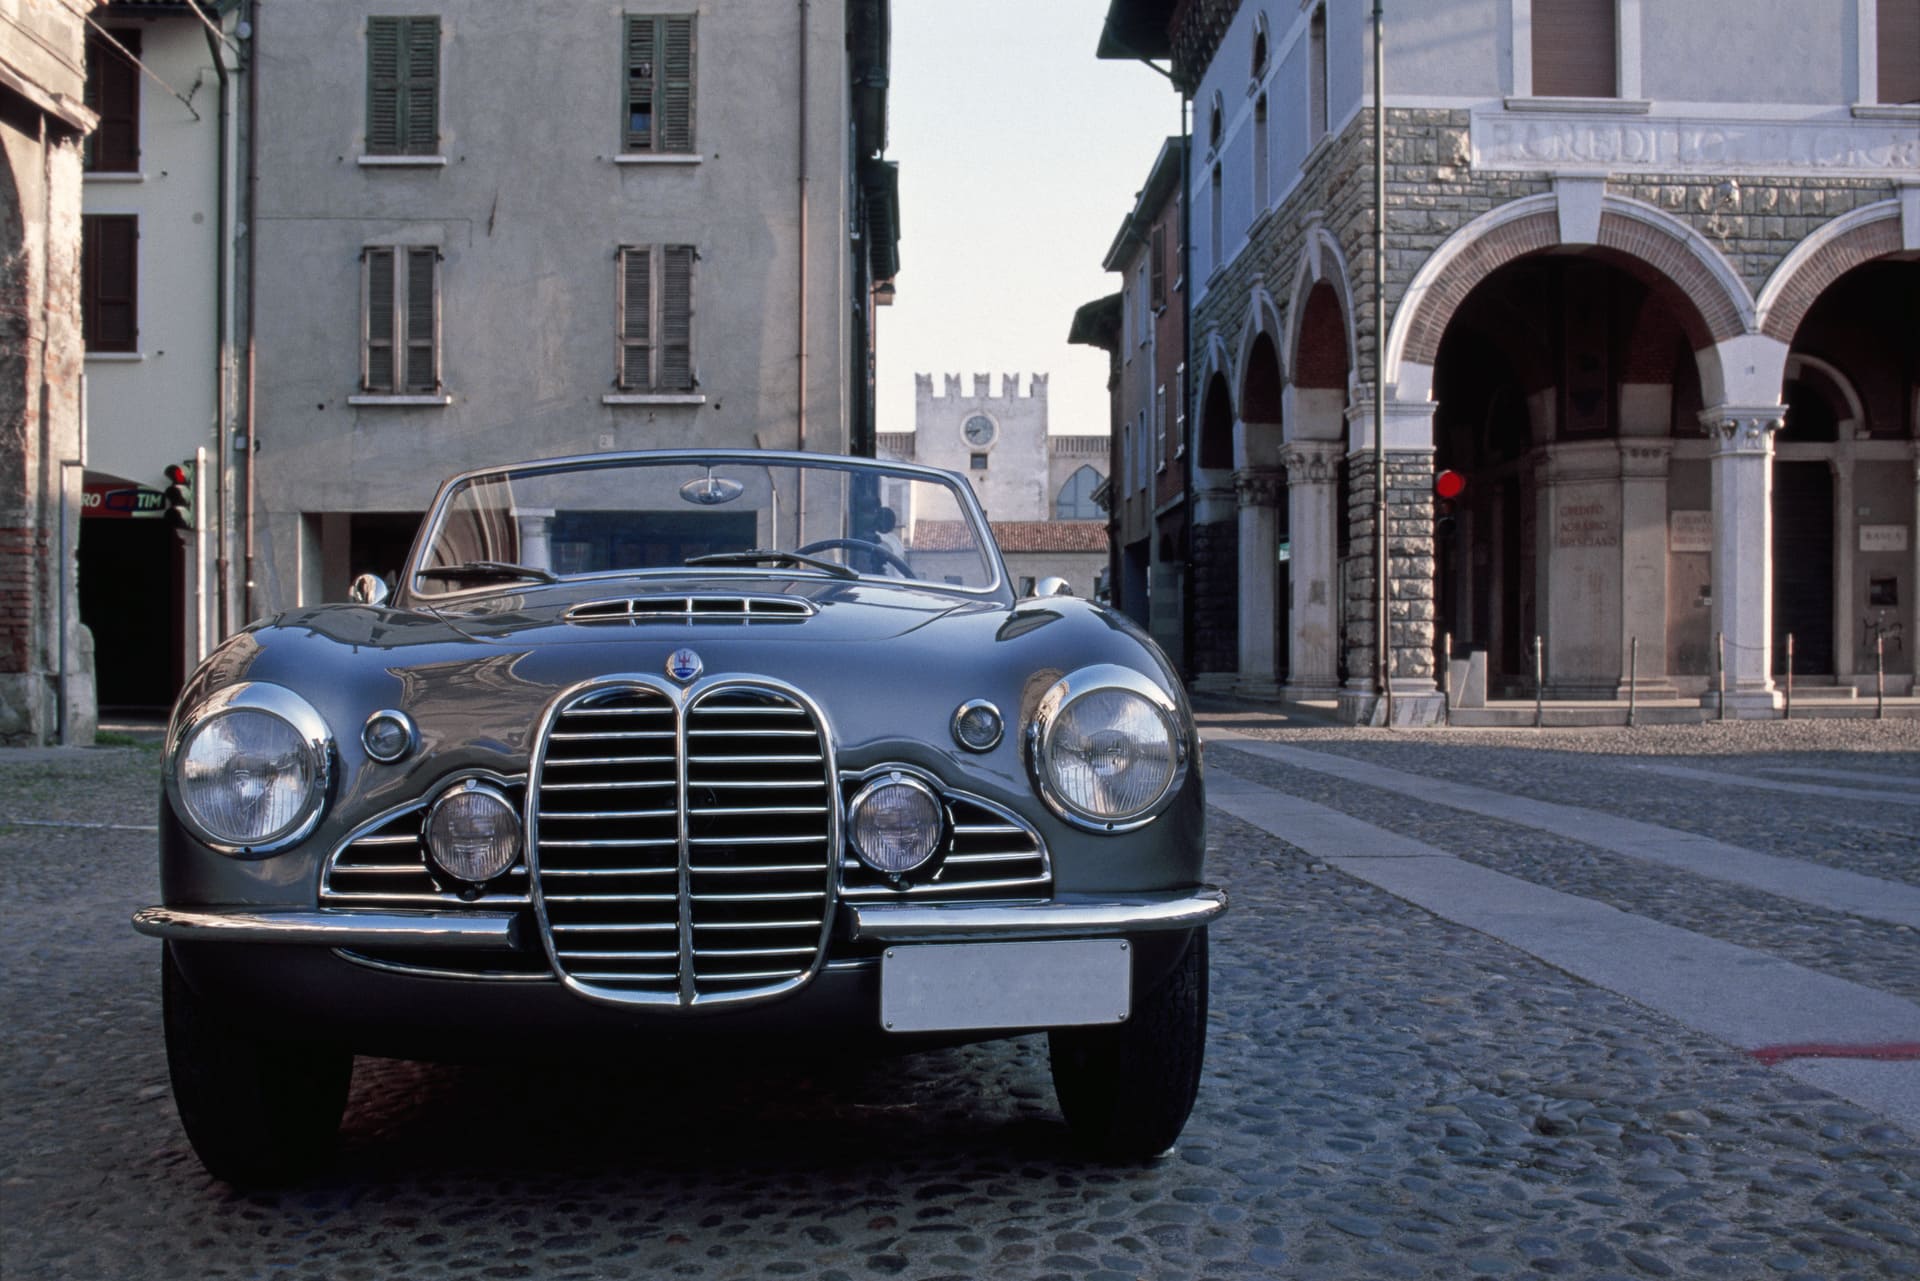 The Maserati A6G 2000 made its first public appearance at the Turin Motor Show in 1950.